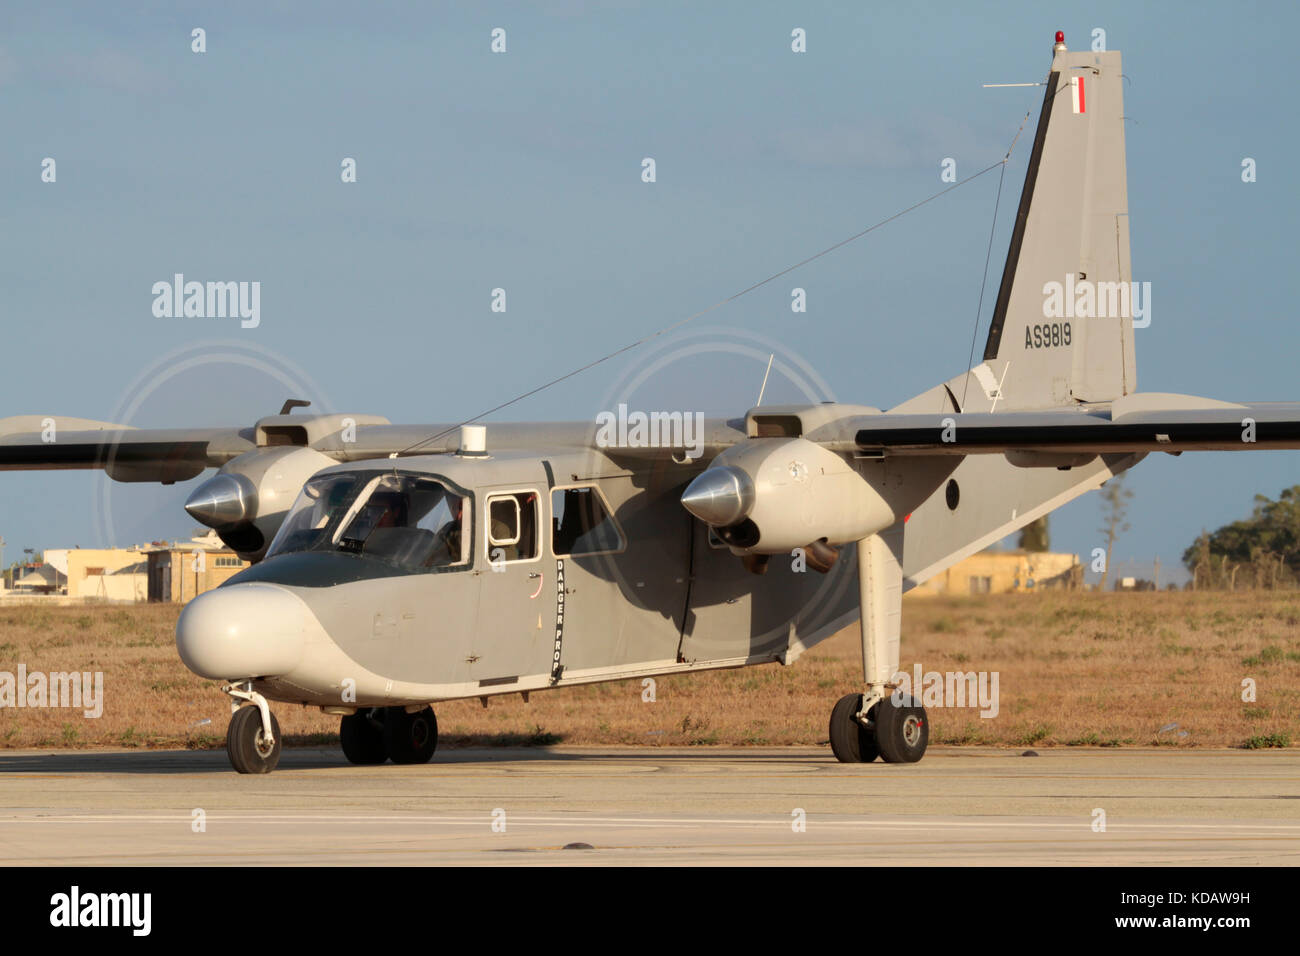 Britten-Norman Islander twin engine propeller powered maritime patrol aircraft of the Armed Forces of Malta starting up with props spinning Stock Photo